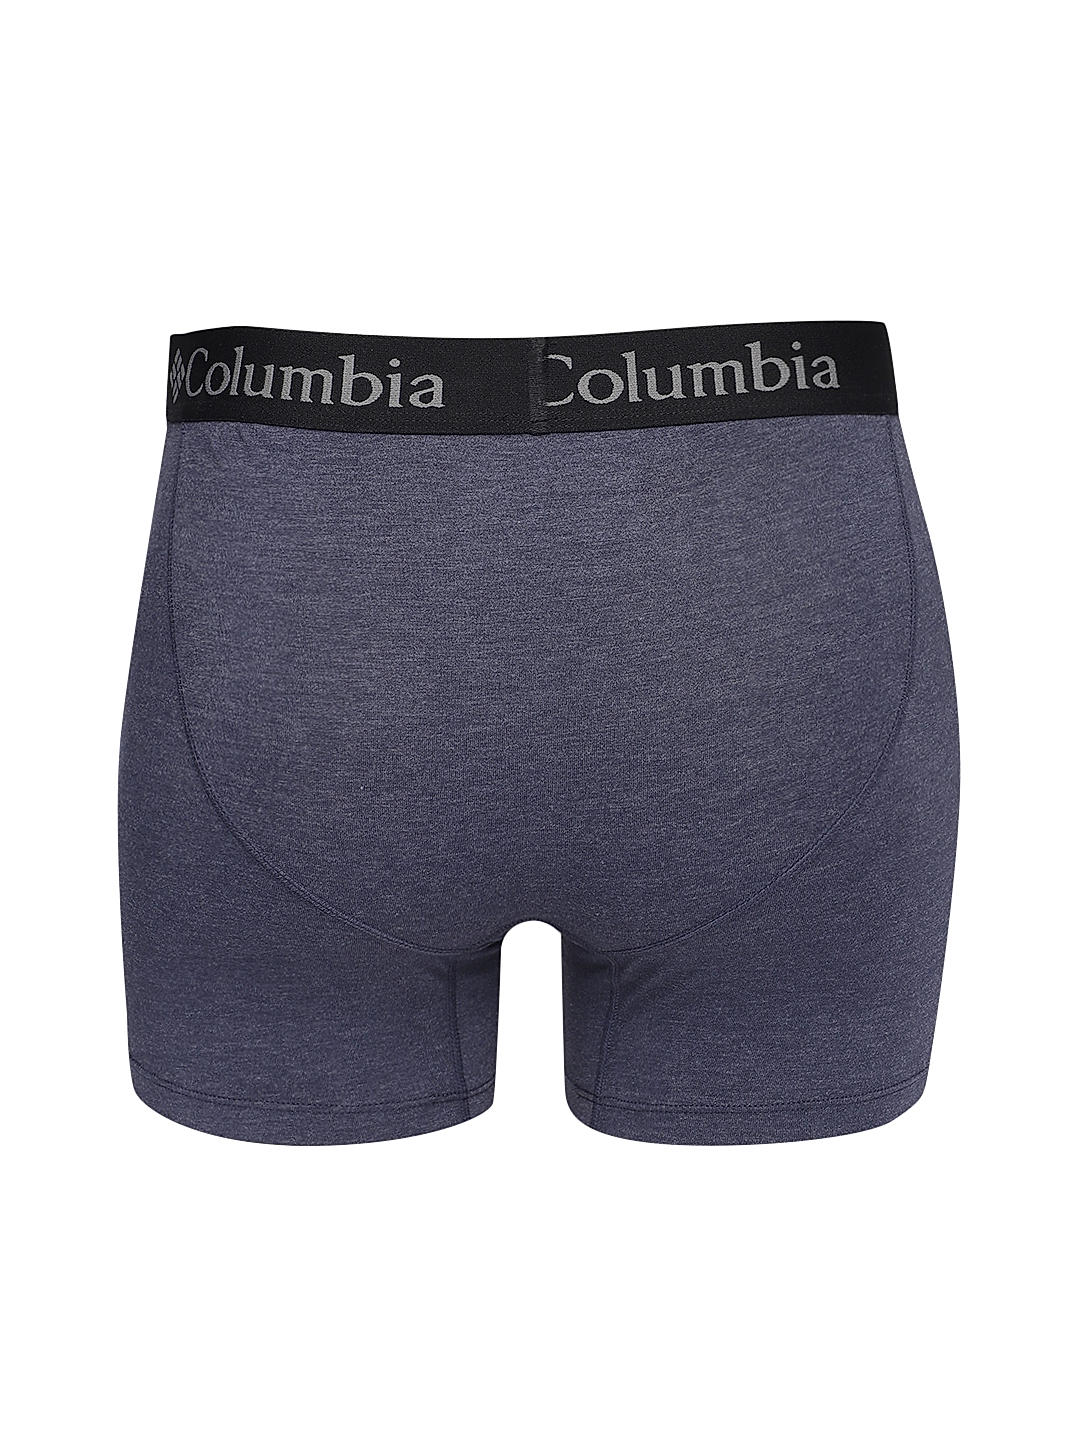 Columbia High Performance Stretch Boxer Briefs Black 3 Pack Mens